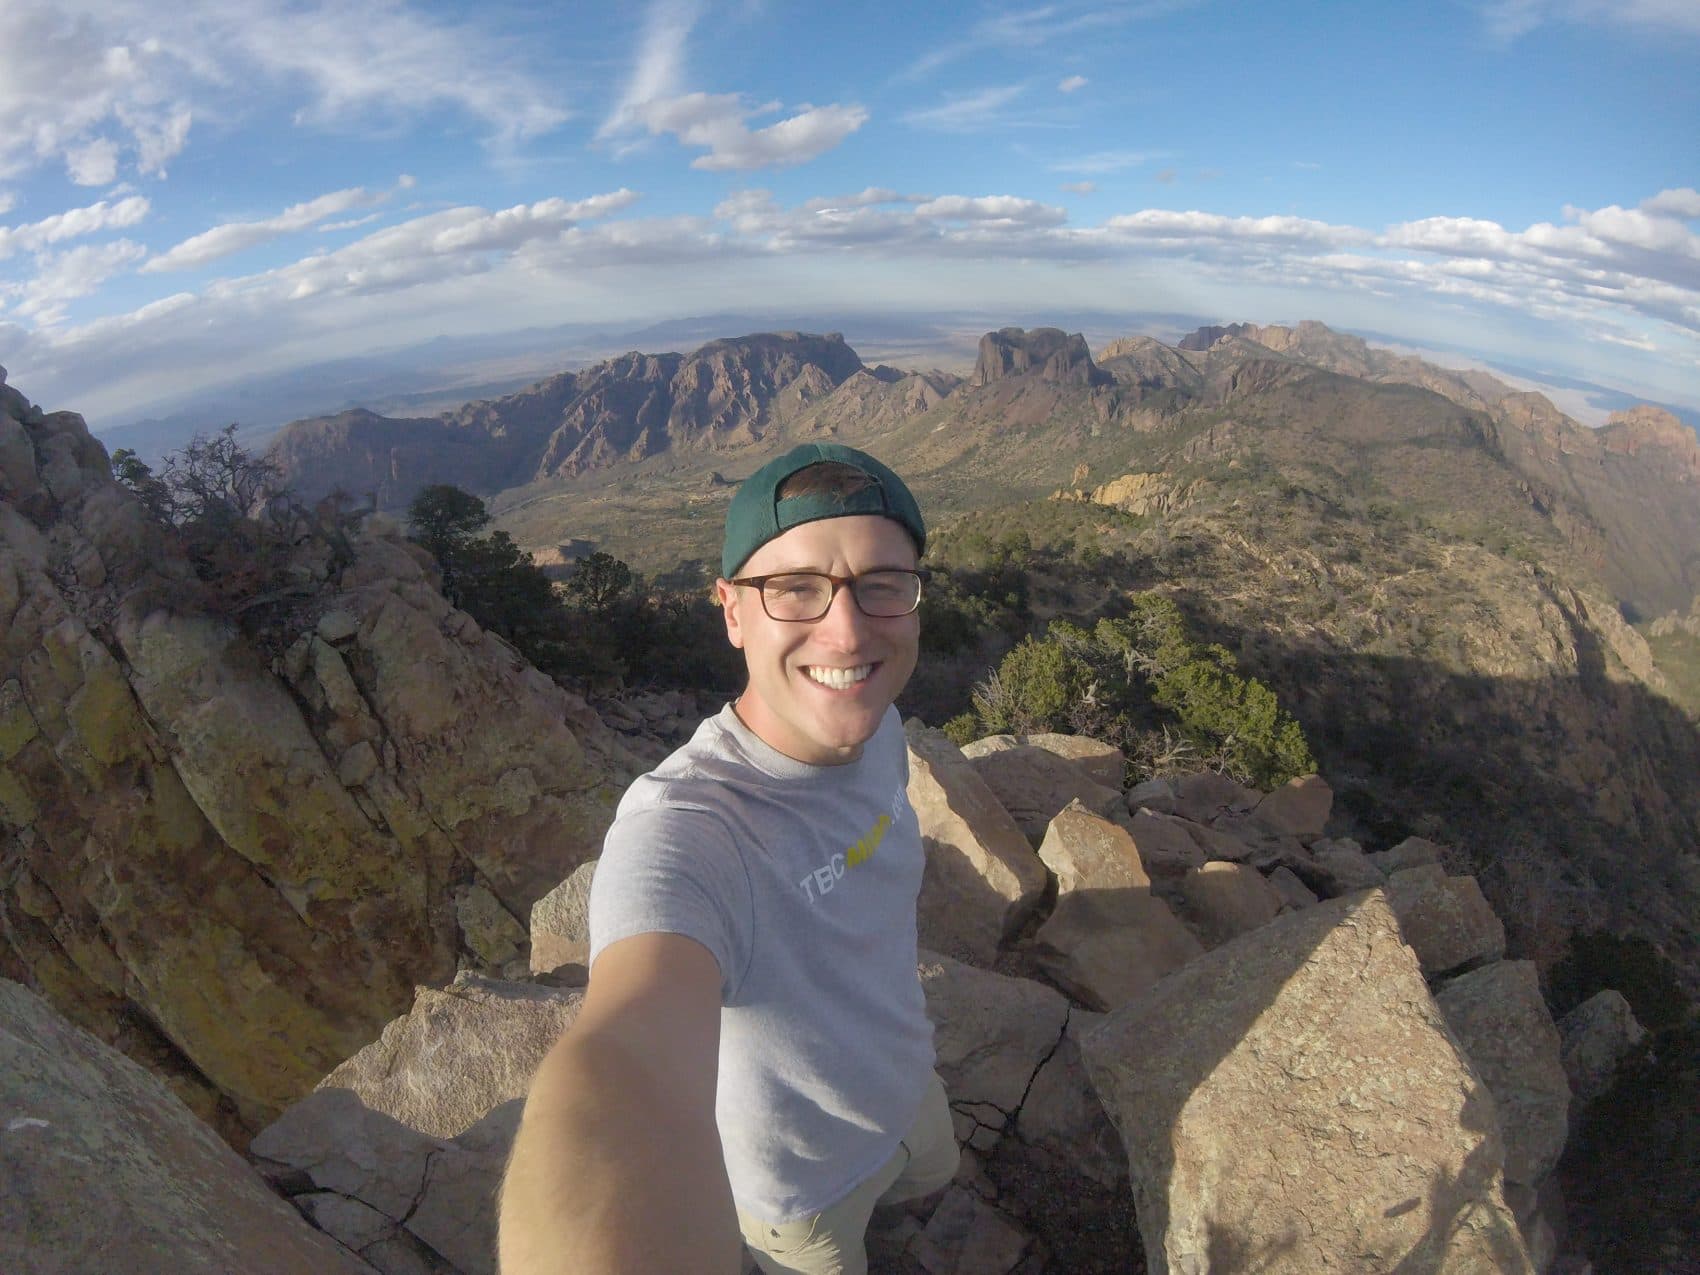 Mikah Meyer on top of Emory Peak in Big Bend National Park in Texas. (Courtesy of Mikah Meyer)